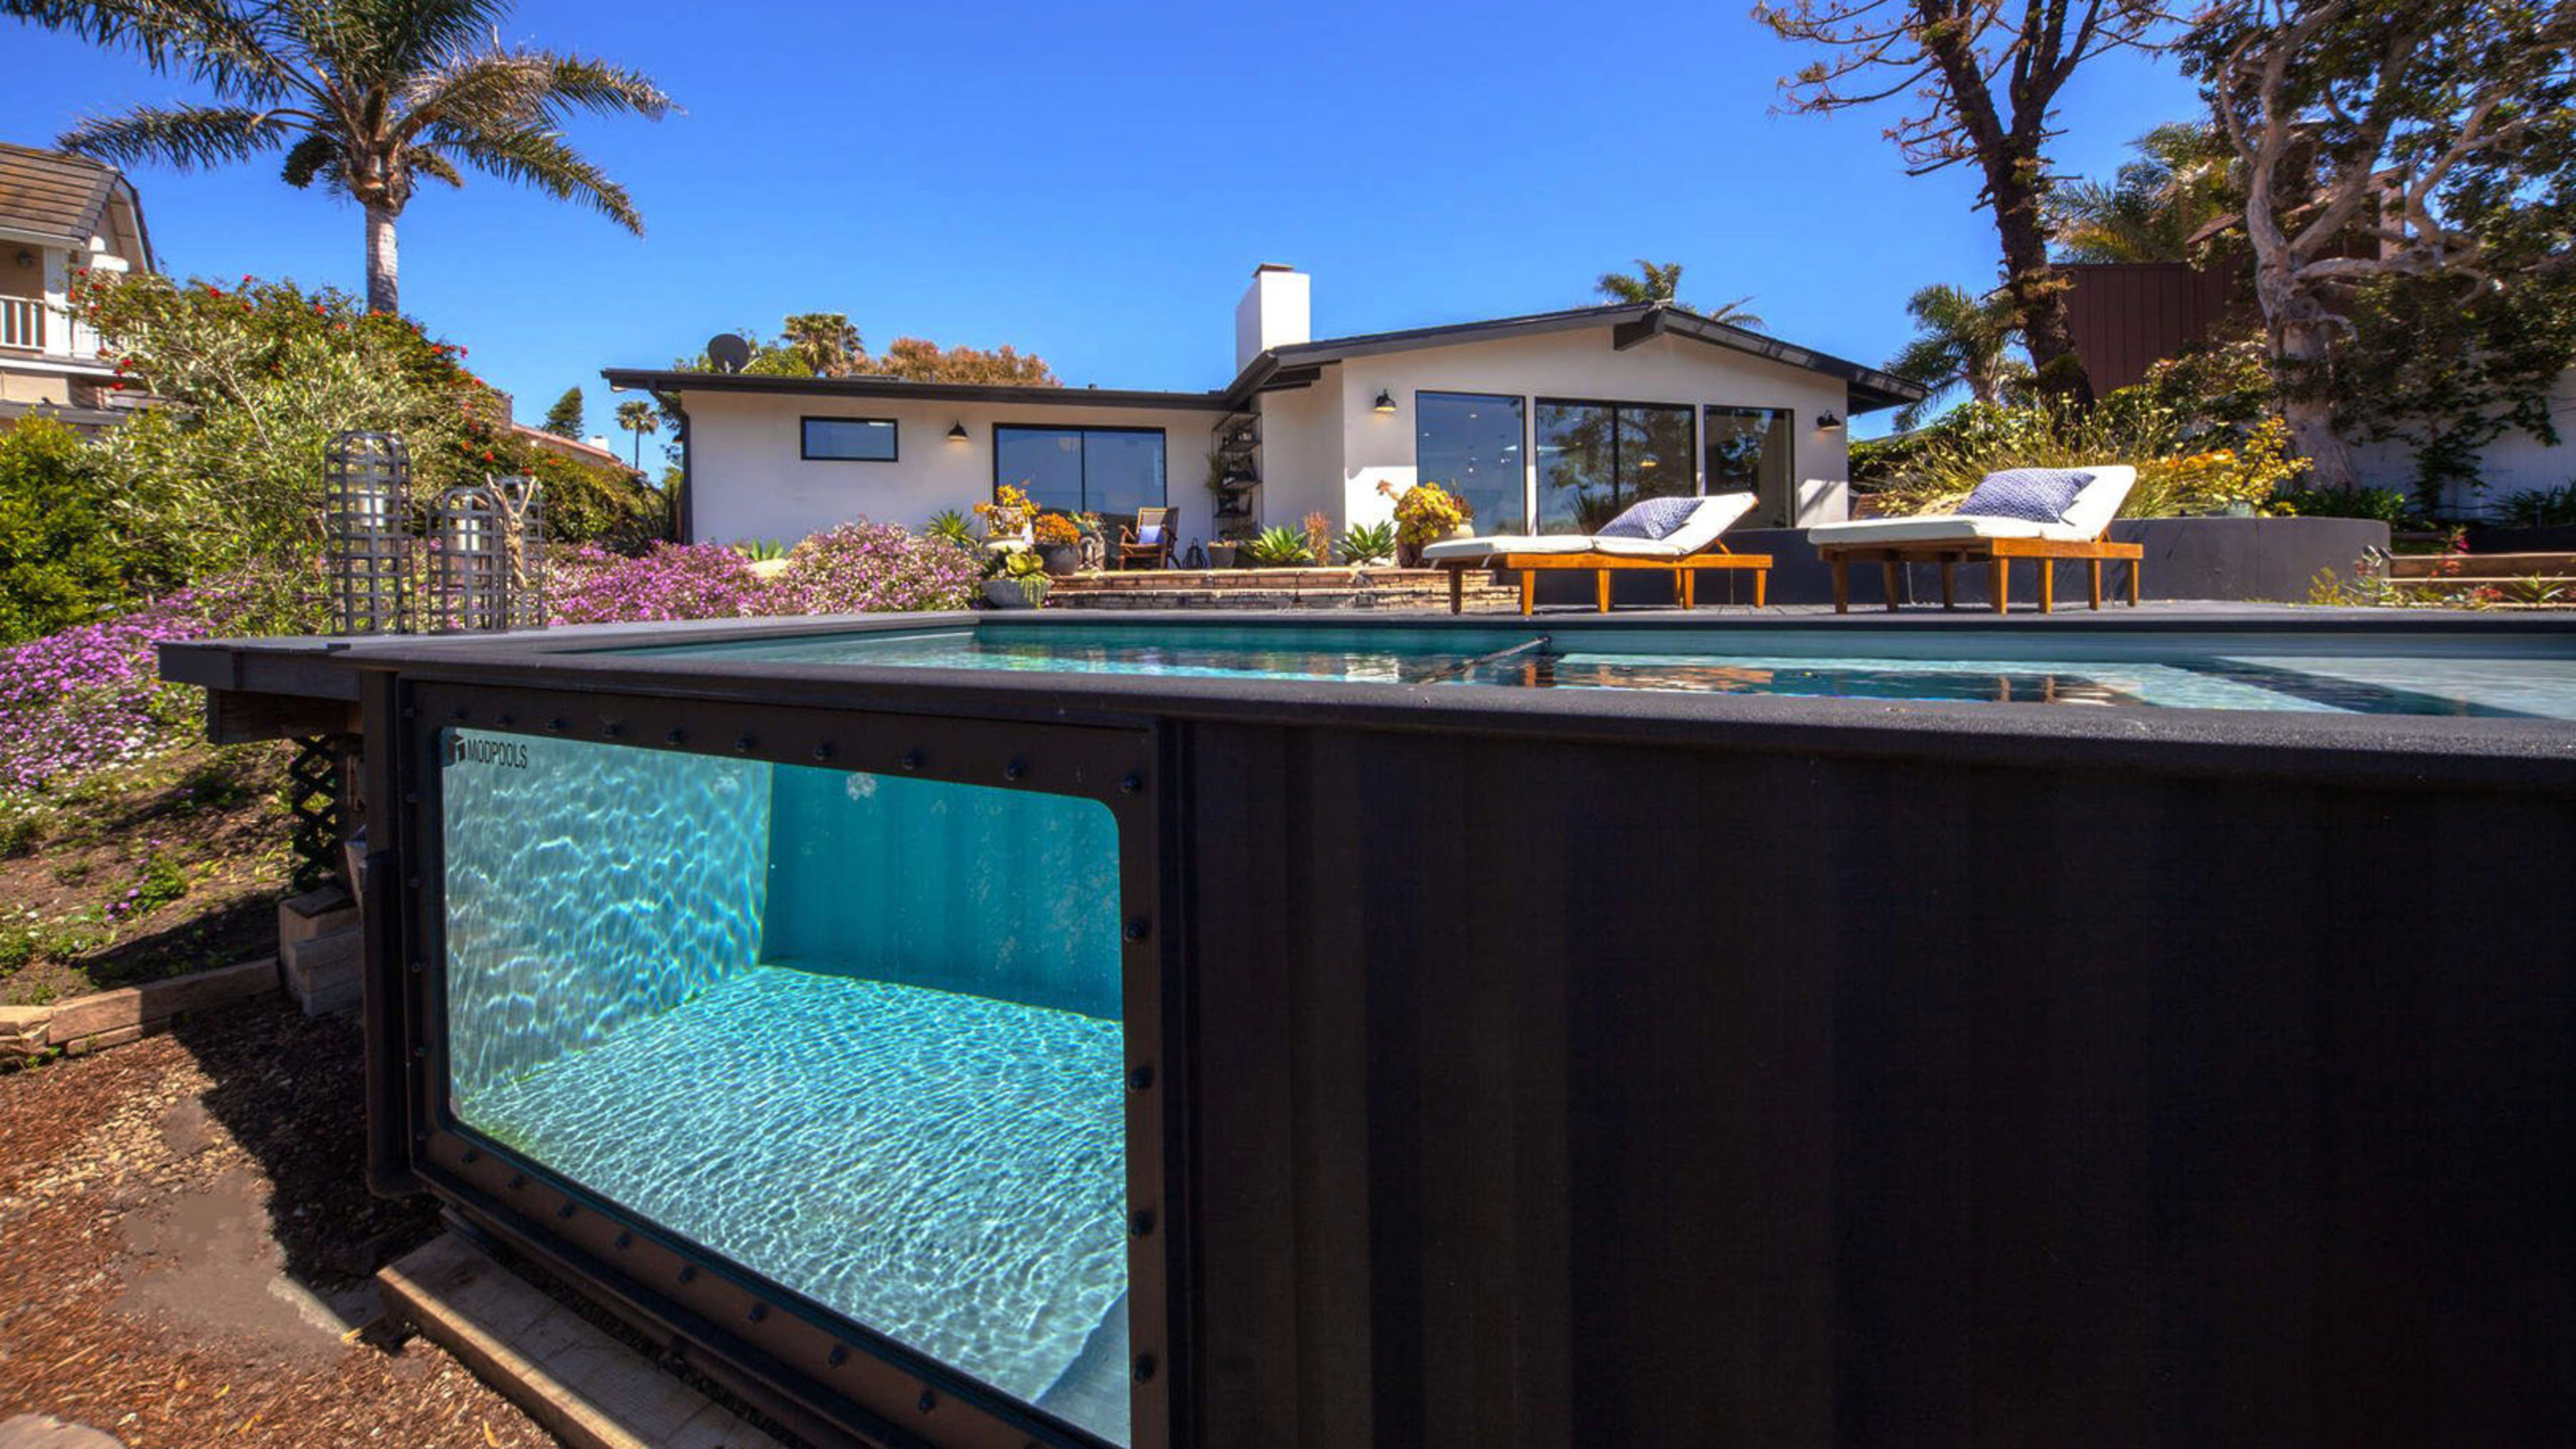 This company recycles shipping containers into backyard swimming pools